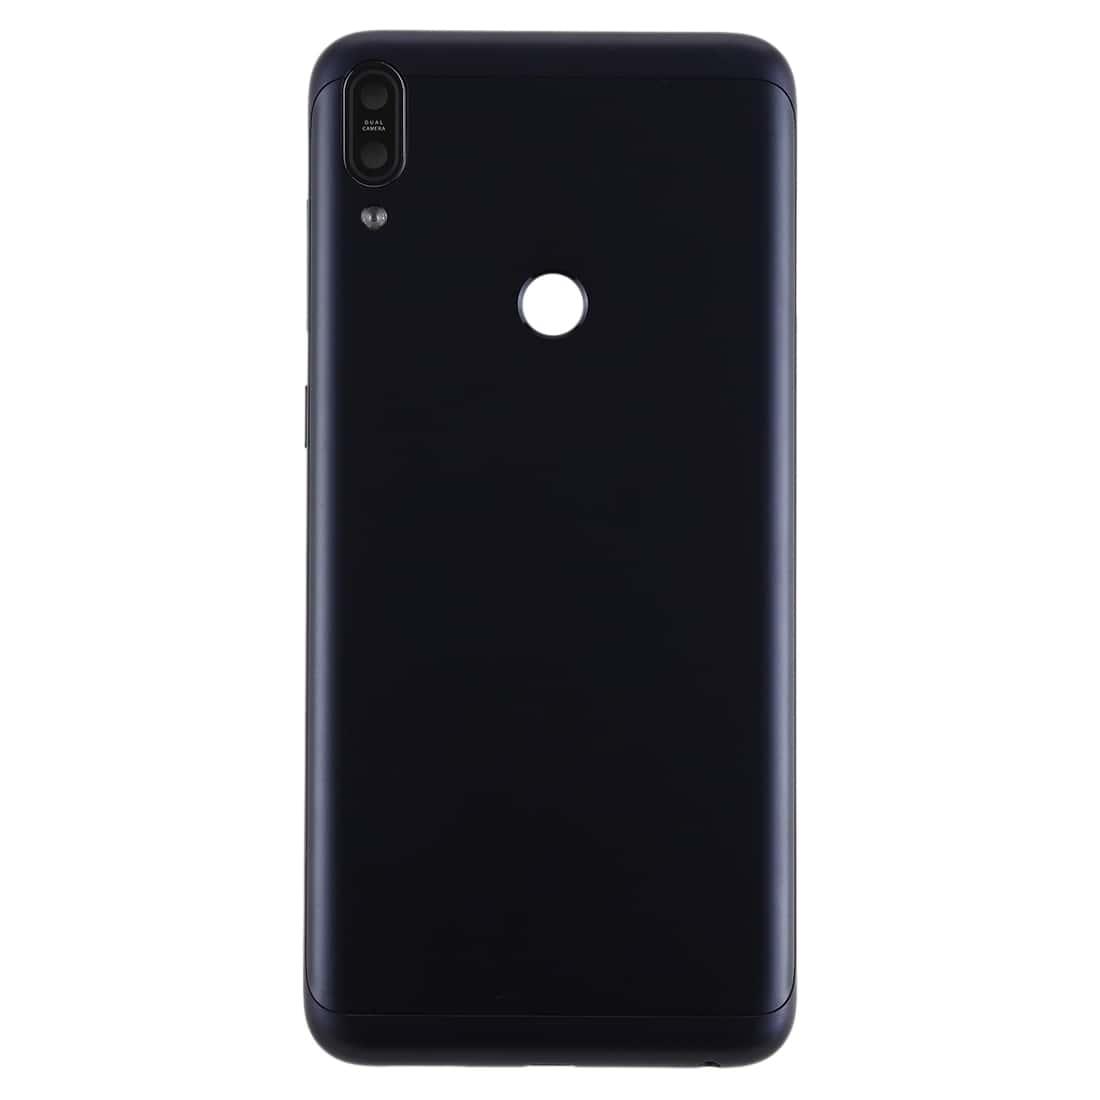 Back Panel Housing Body for Asus Zenfone Max Pro M1 Black with Camera Lens